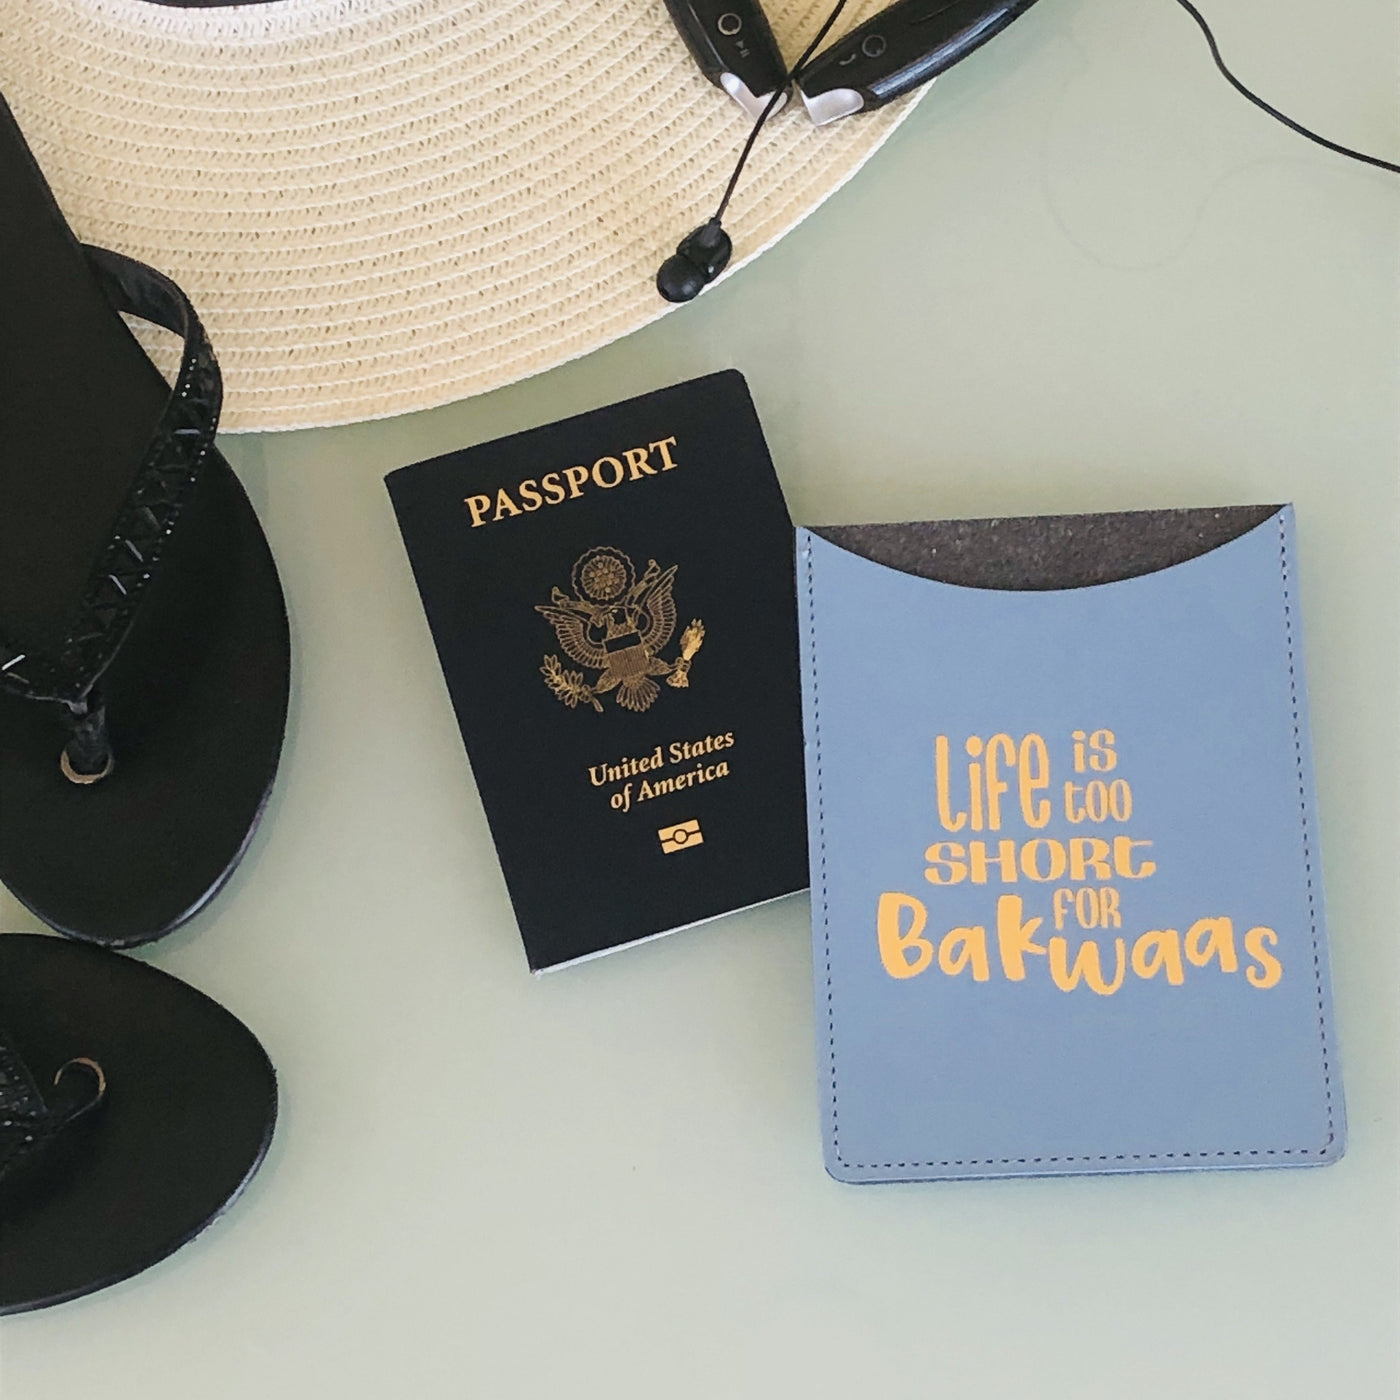 Life is too Short for Bakwaas Passport Cover